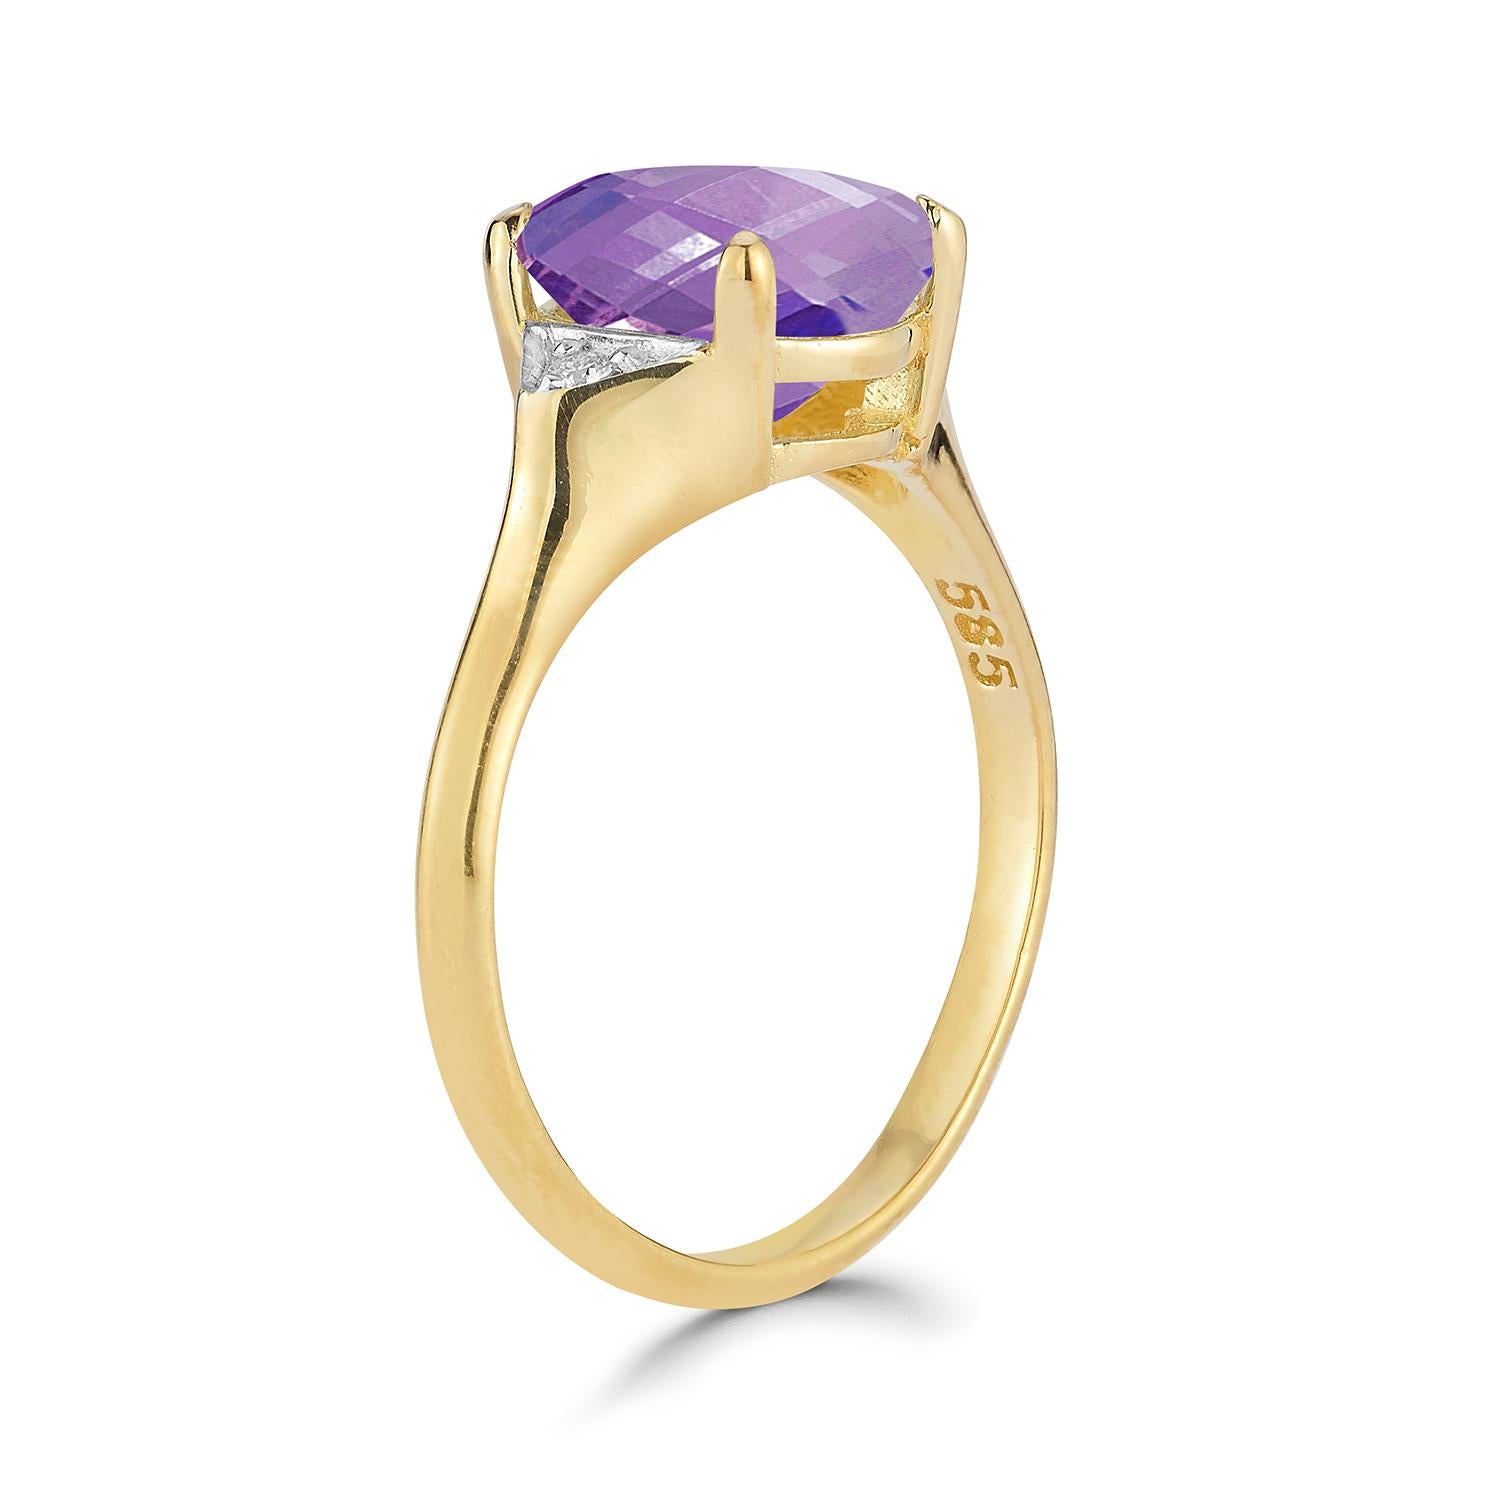 For Sale:  Hand-Crafted 14K Gold 0.05 ct. tw. Diamond & 5.35CT Amethyst Cocktail Ring 3